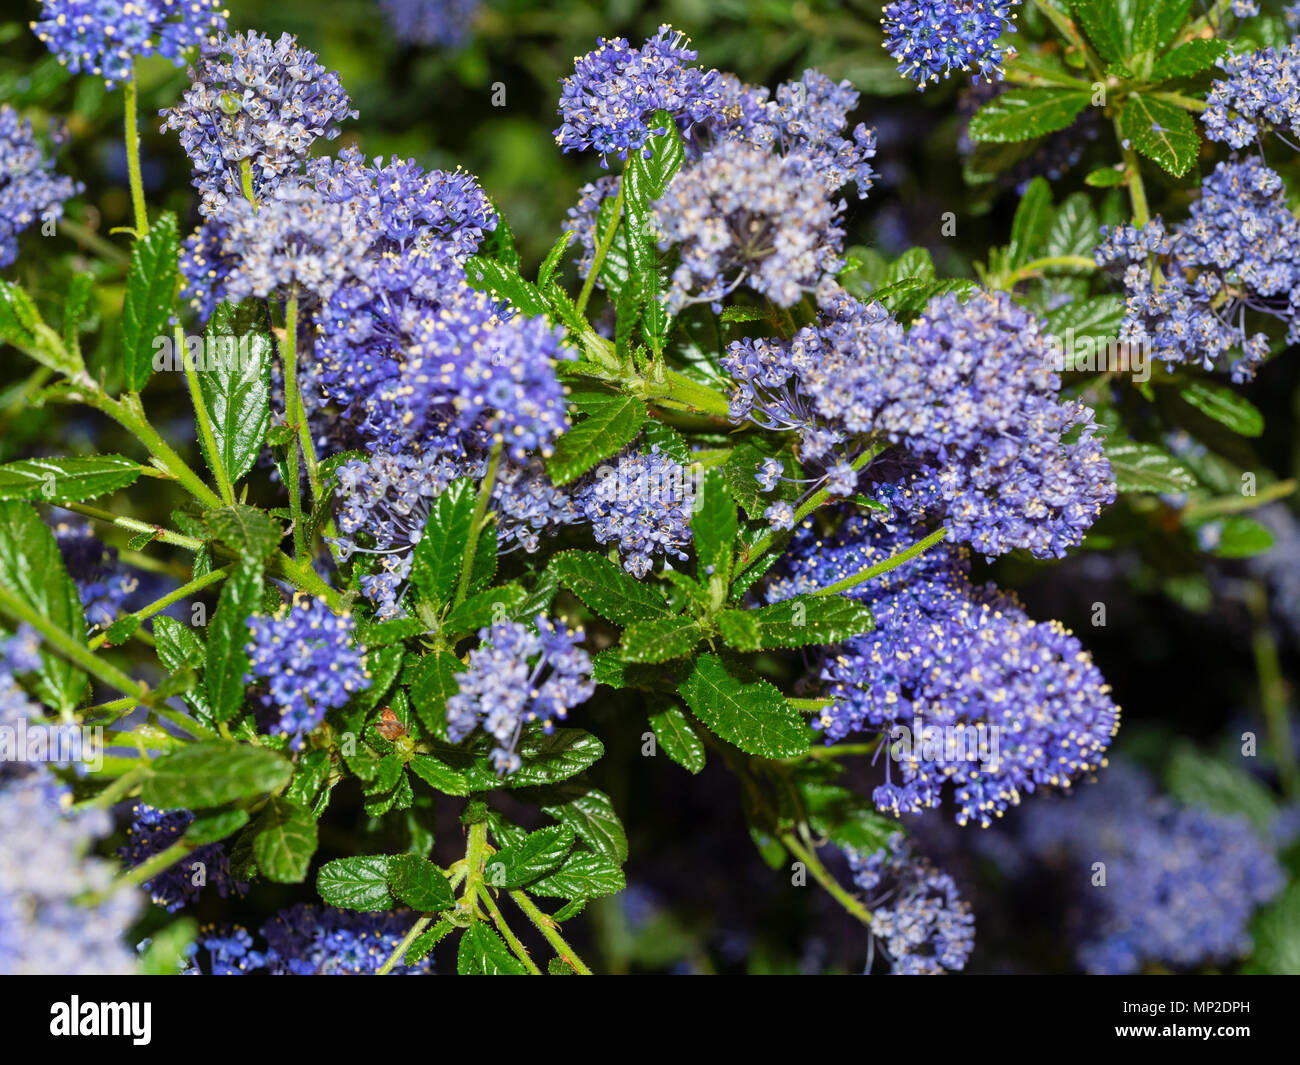 Densely packed blue flowers in the heads of the Californian lilac, Ceanothus 'Concha' Stock Photo